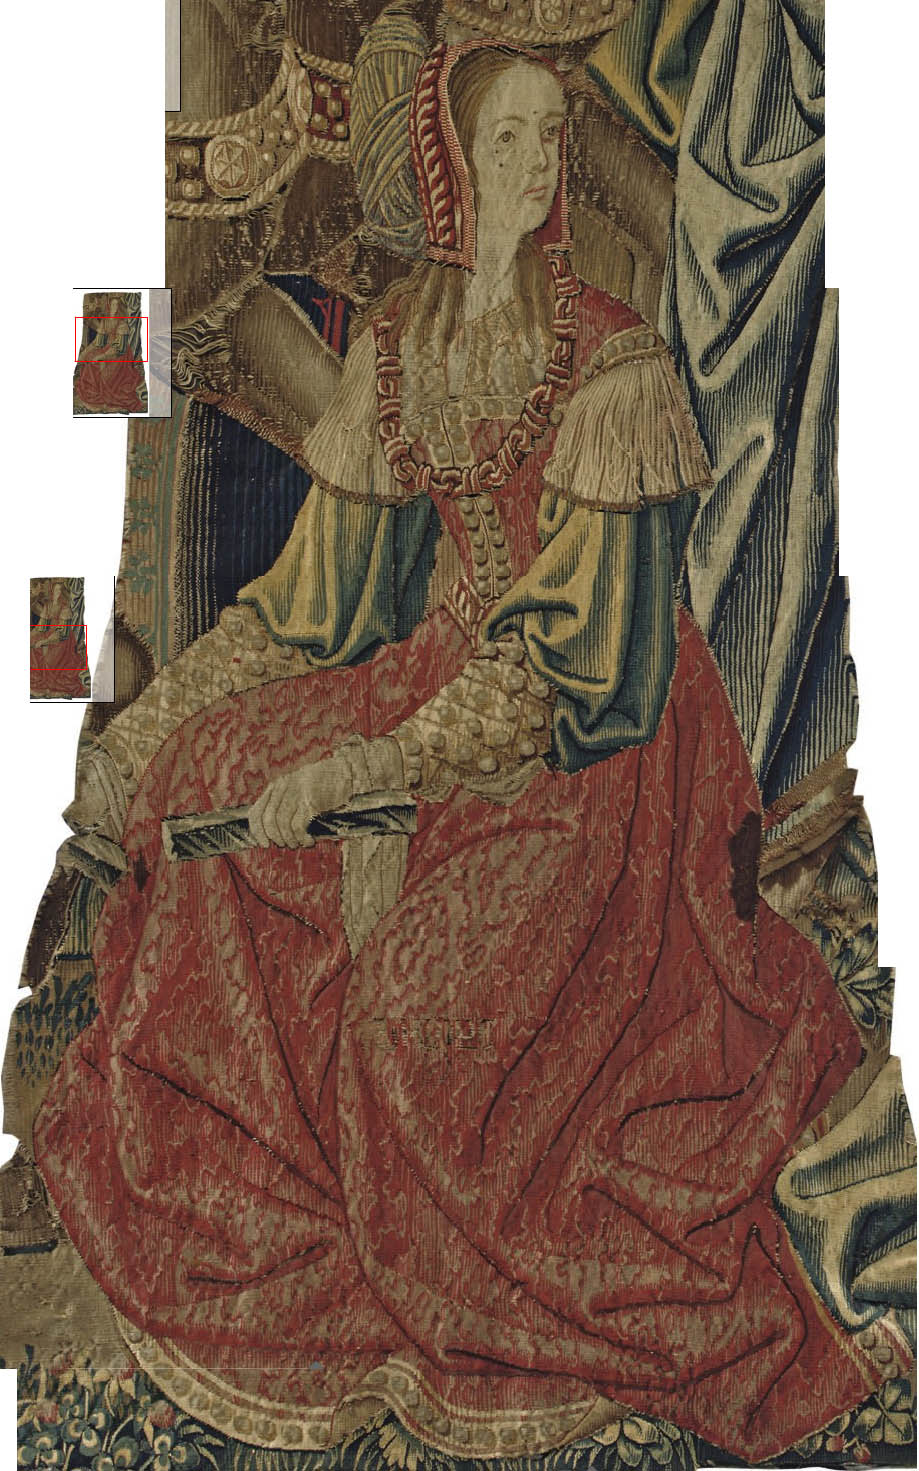 date unknown - A FRANCO-FLEMISH TAPESTRY FRAGMENT - The Triumph of Chastity over Love, depicting the seated figure of Penelope